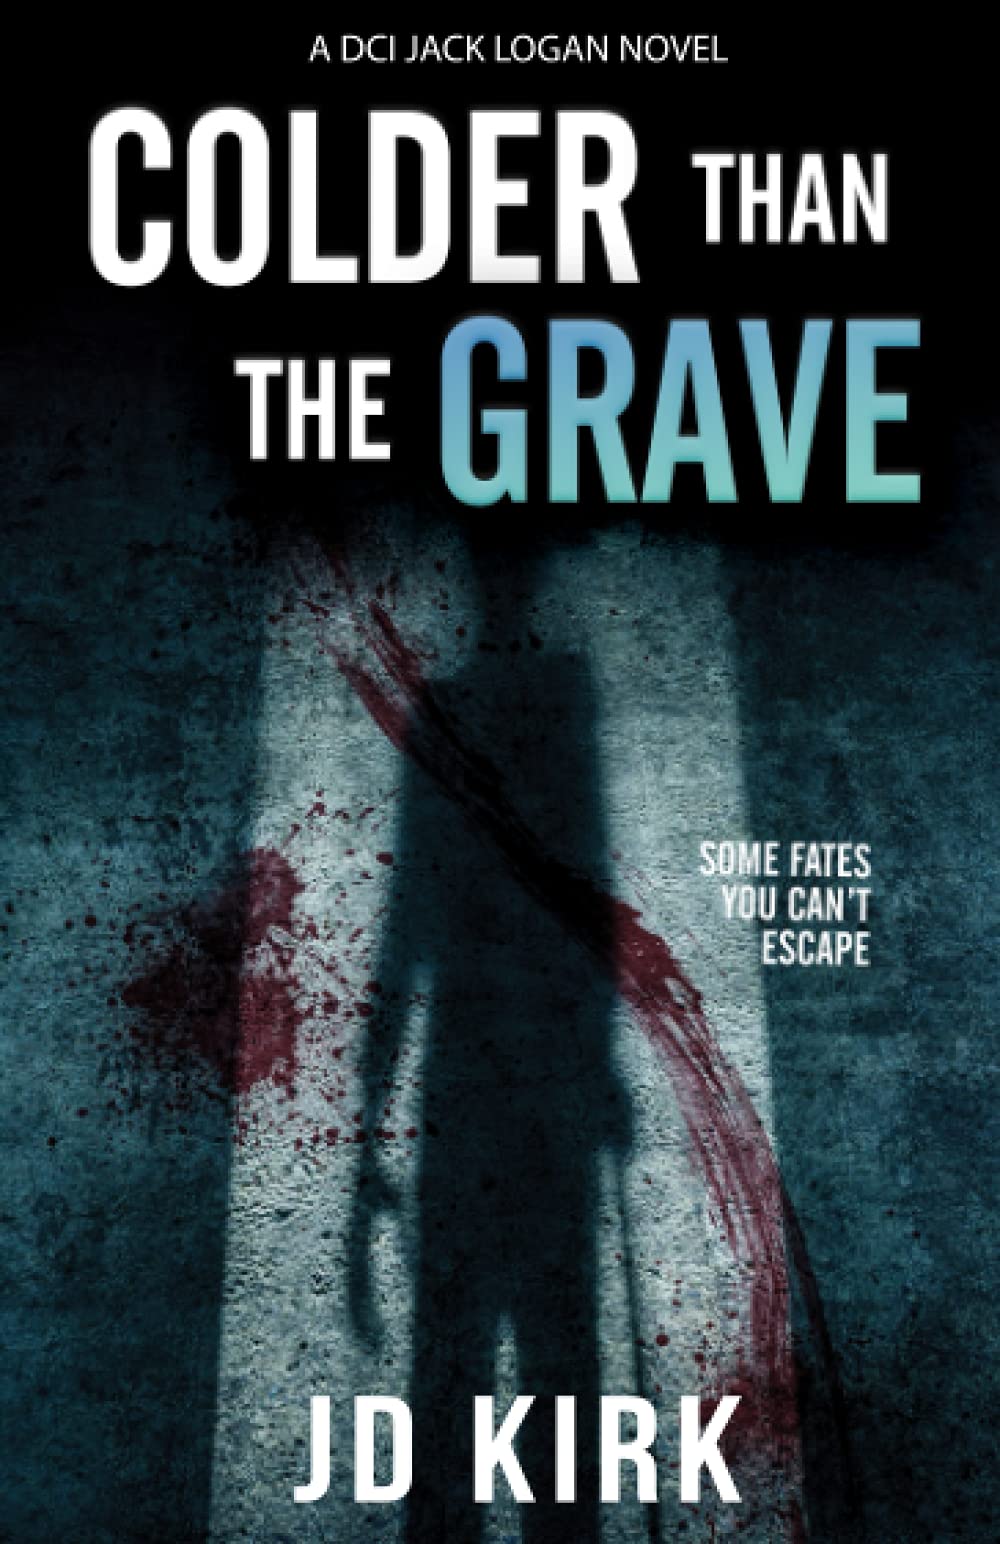 [EPUB] DCI Logan Crime Thrillers #12 Colder Than the Grave by J.D. Kirk